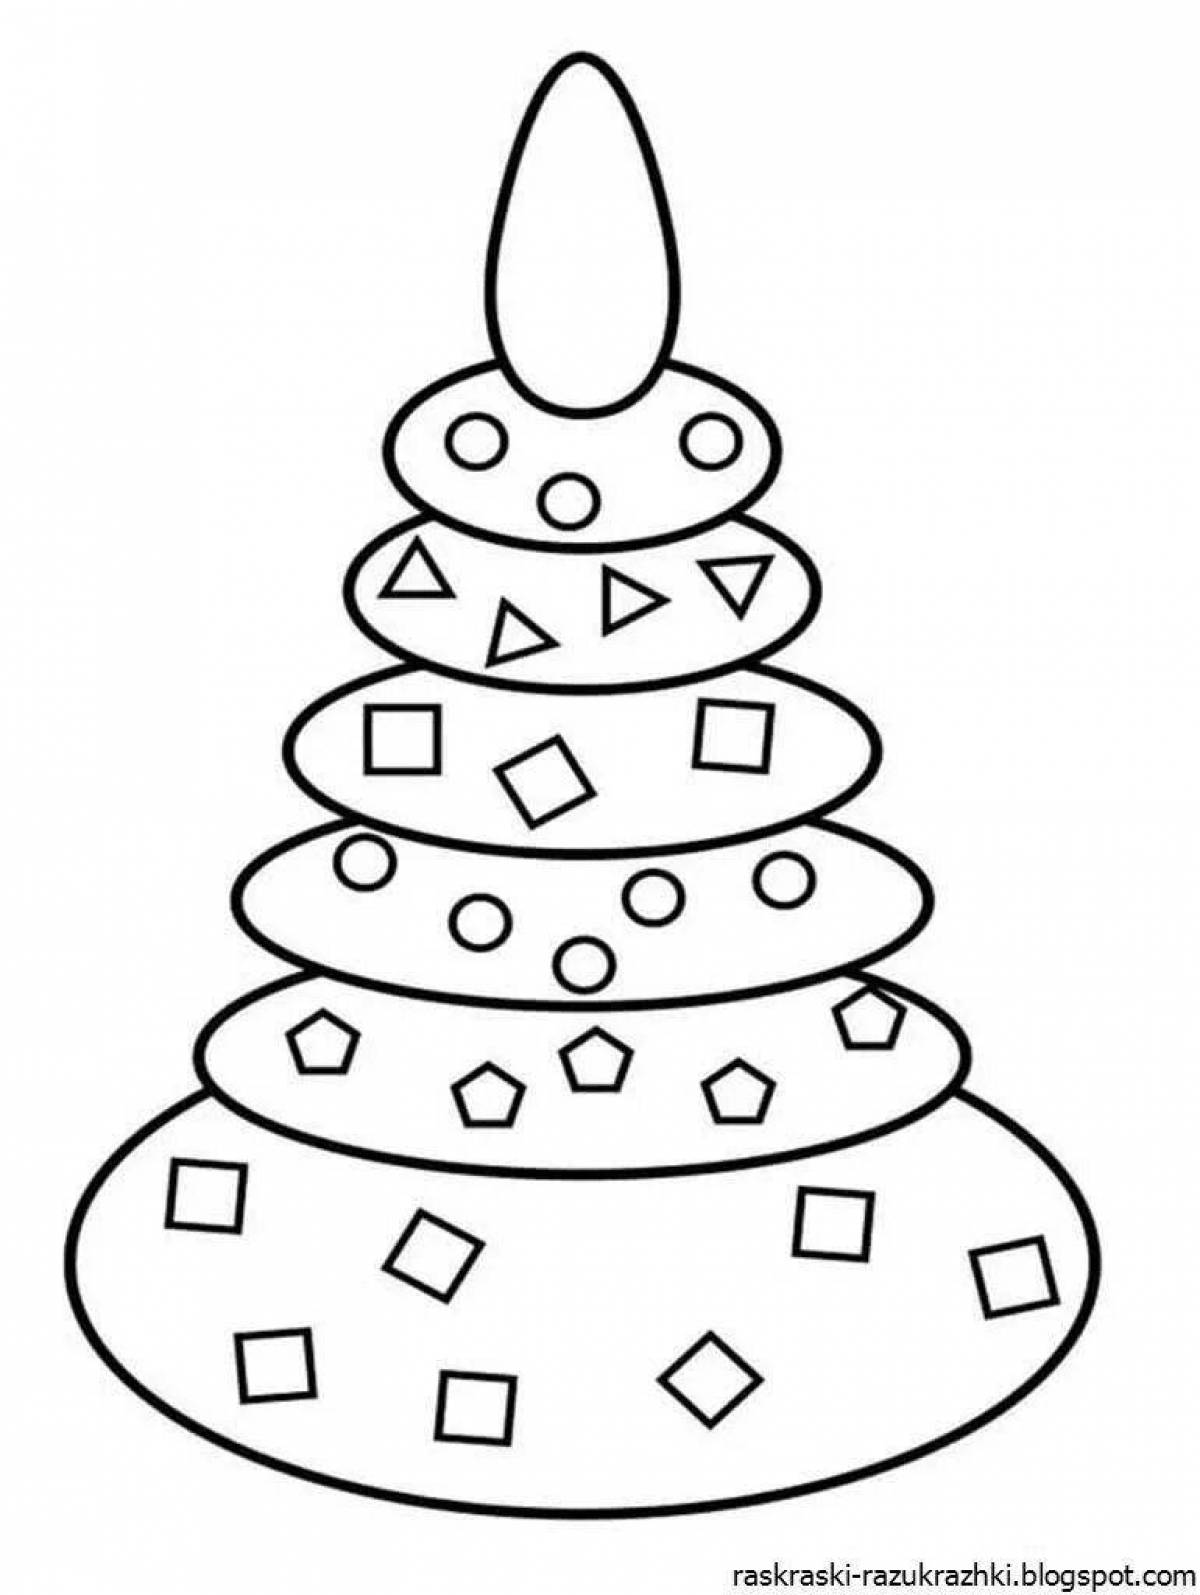 Fun coloring pyramid for children 4-5 years old